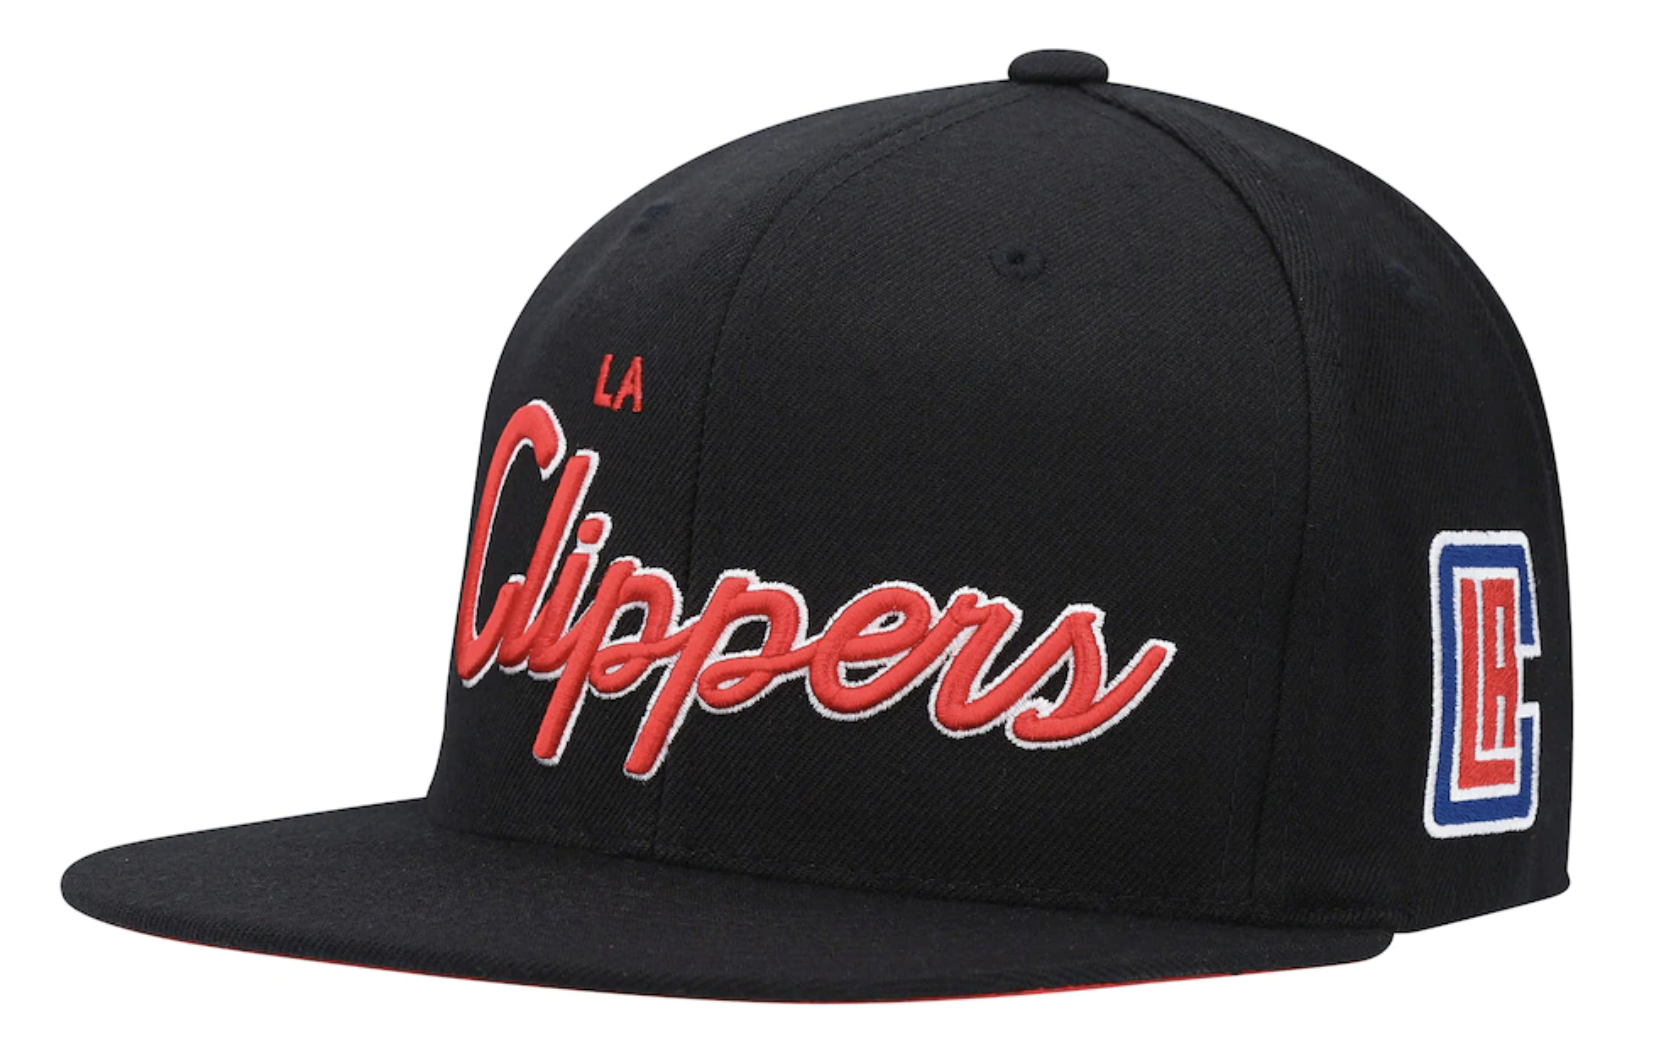 clippers hat.png